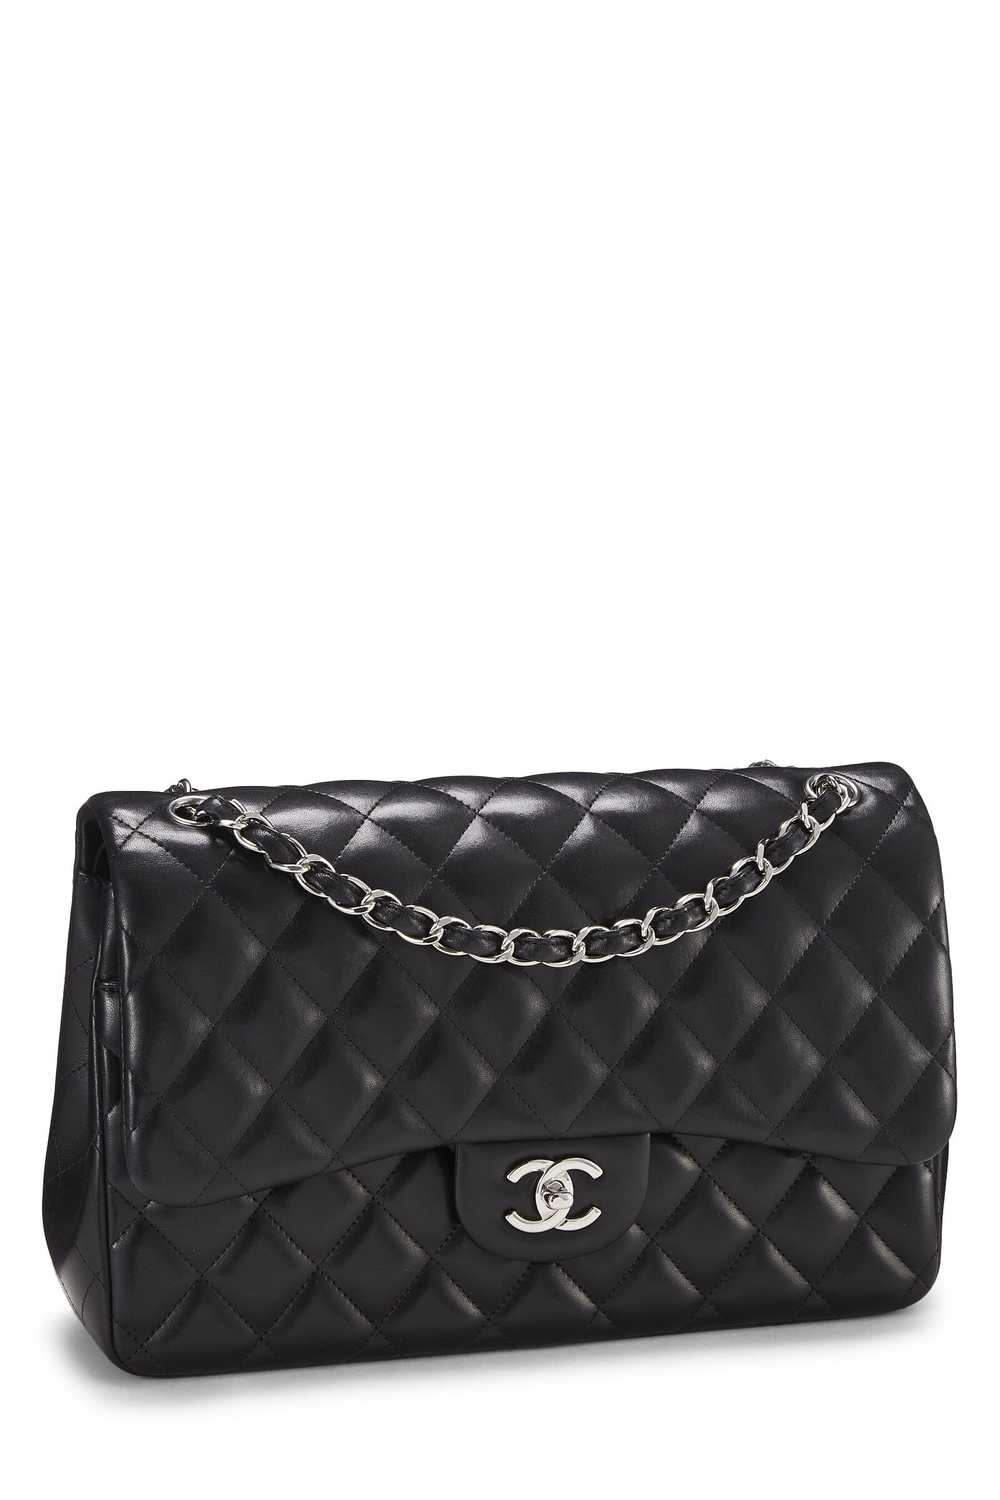 Black Quilted Lambskin New Classic Double Flap Ju… - image 2